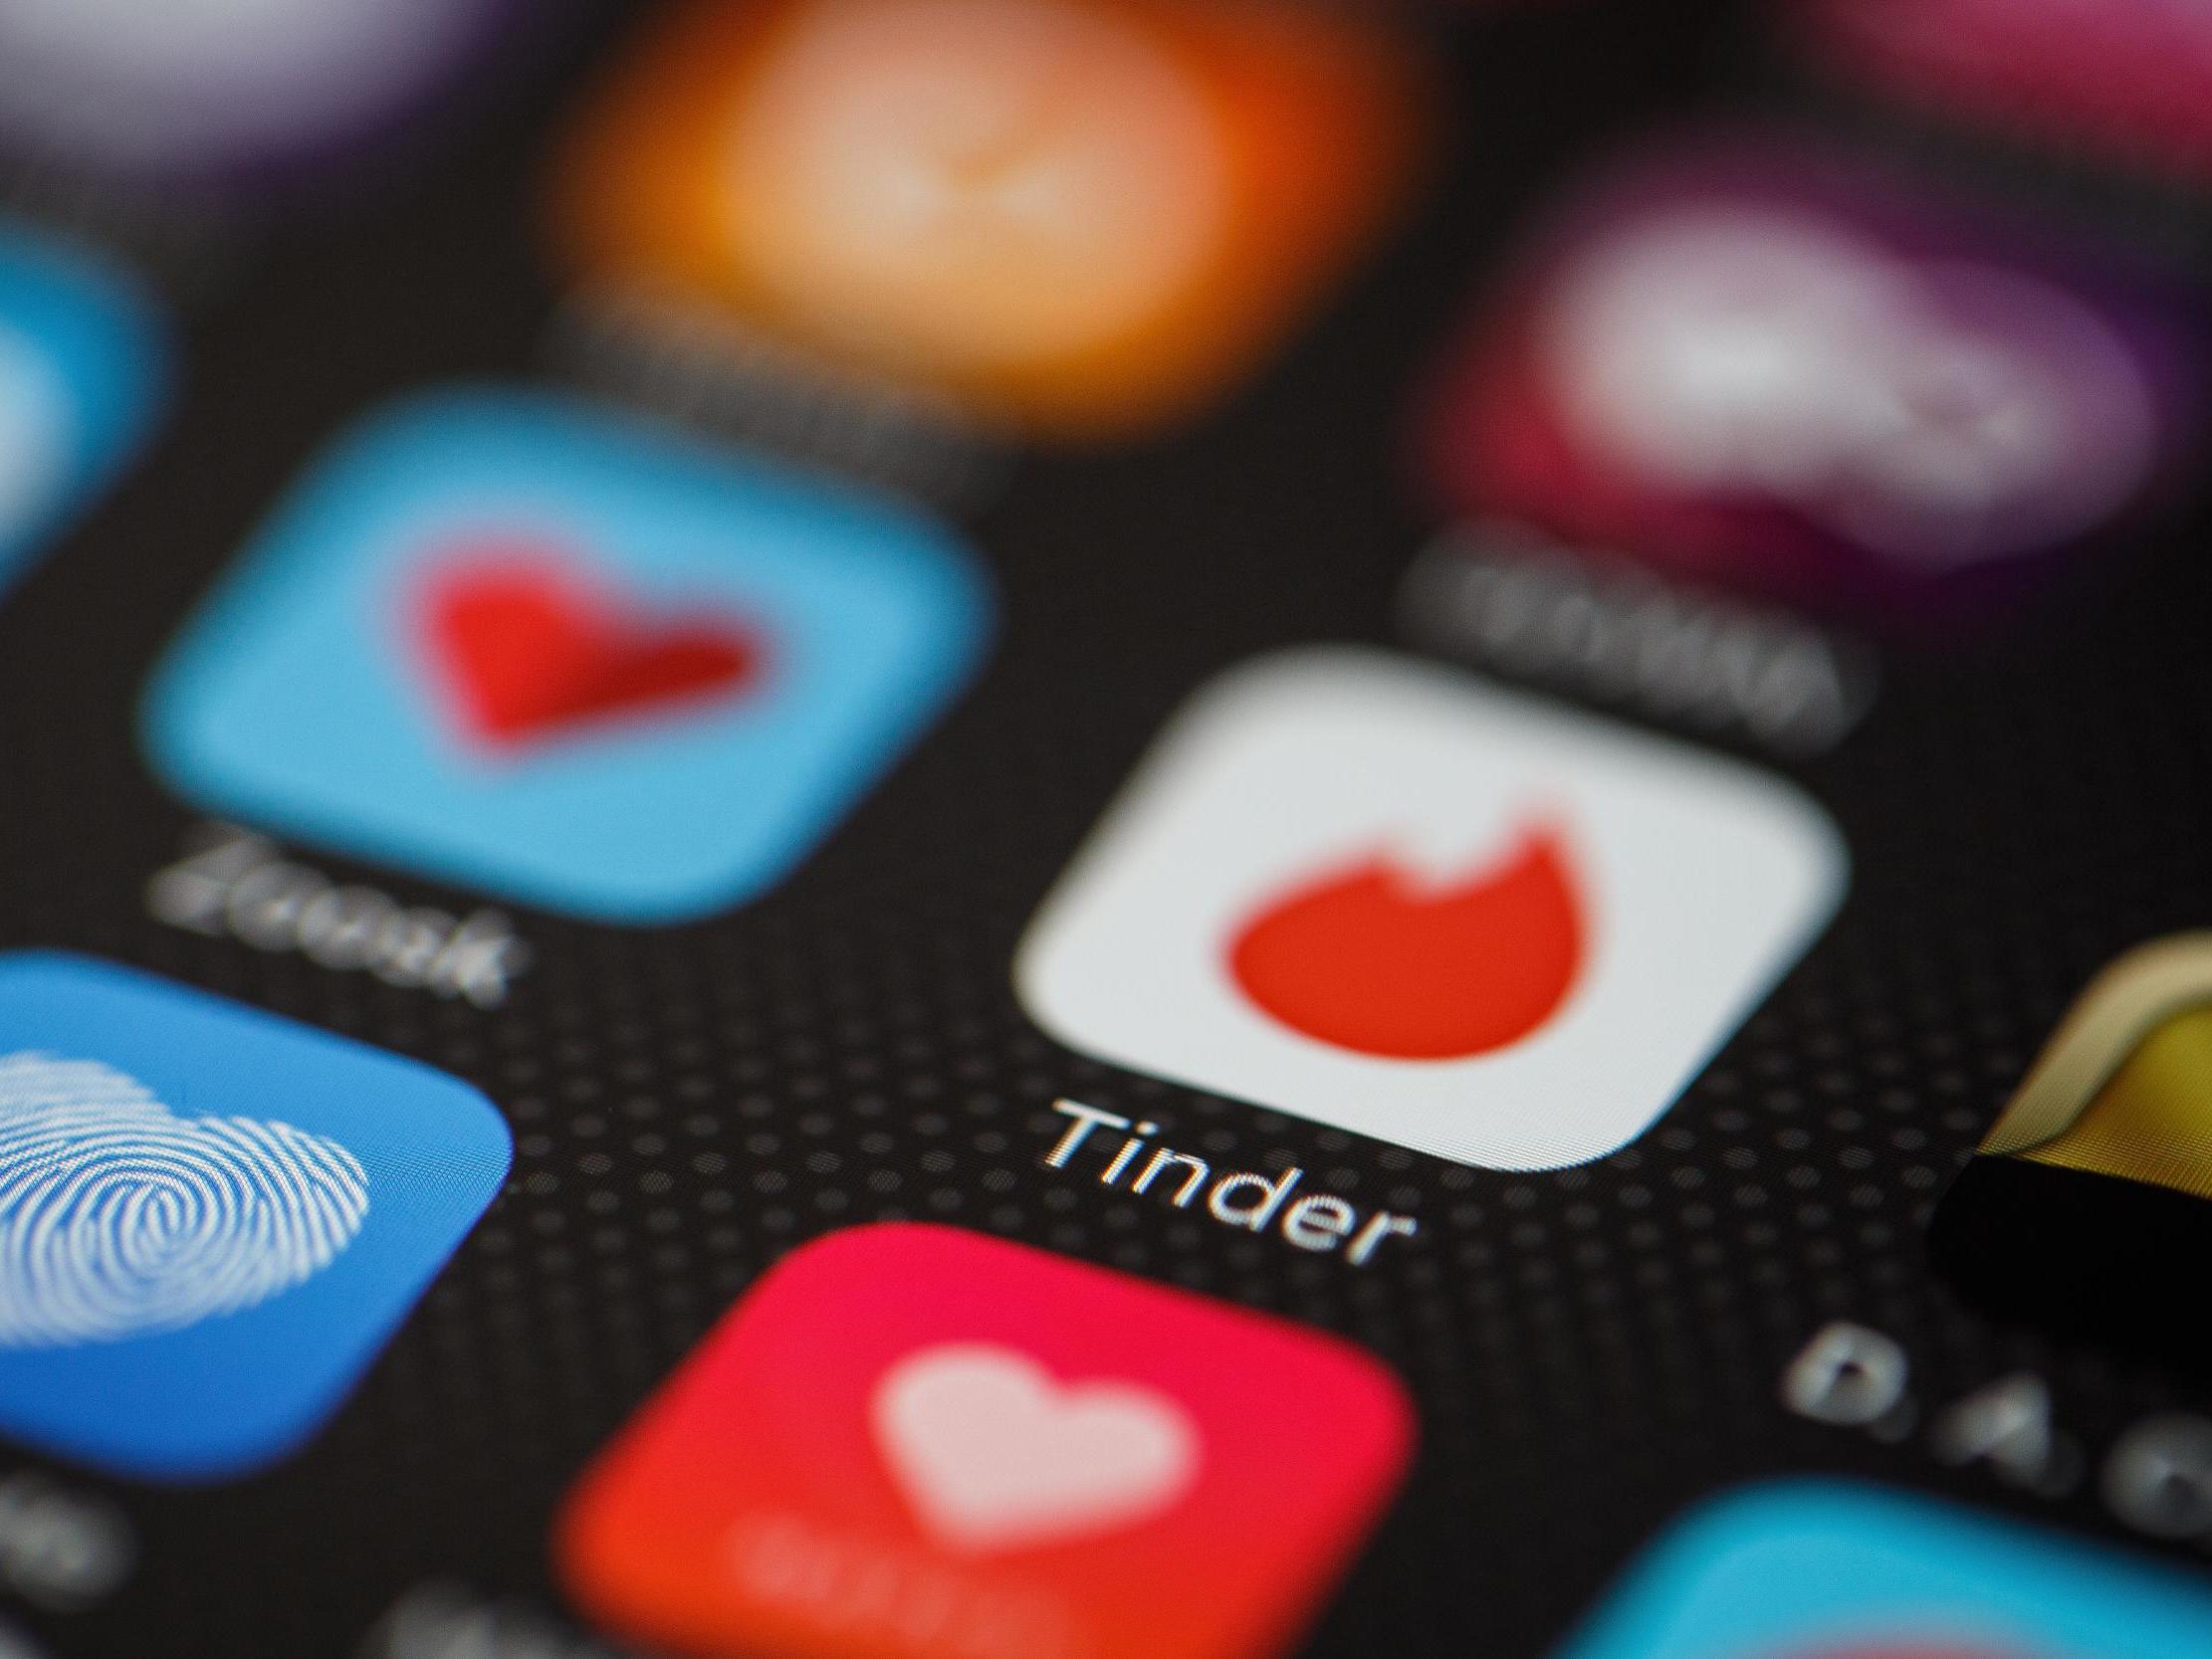 The "Tinder" app logo is seen amongst other dating apps on a mobile phone screen on November 24, 2016 in London, England.